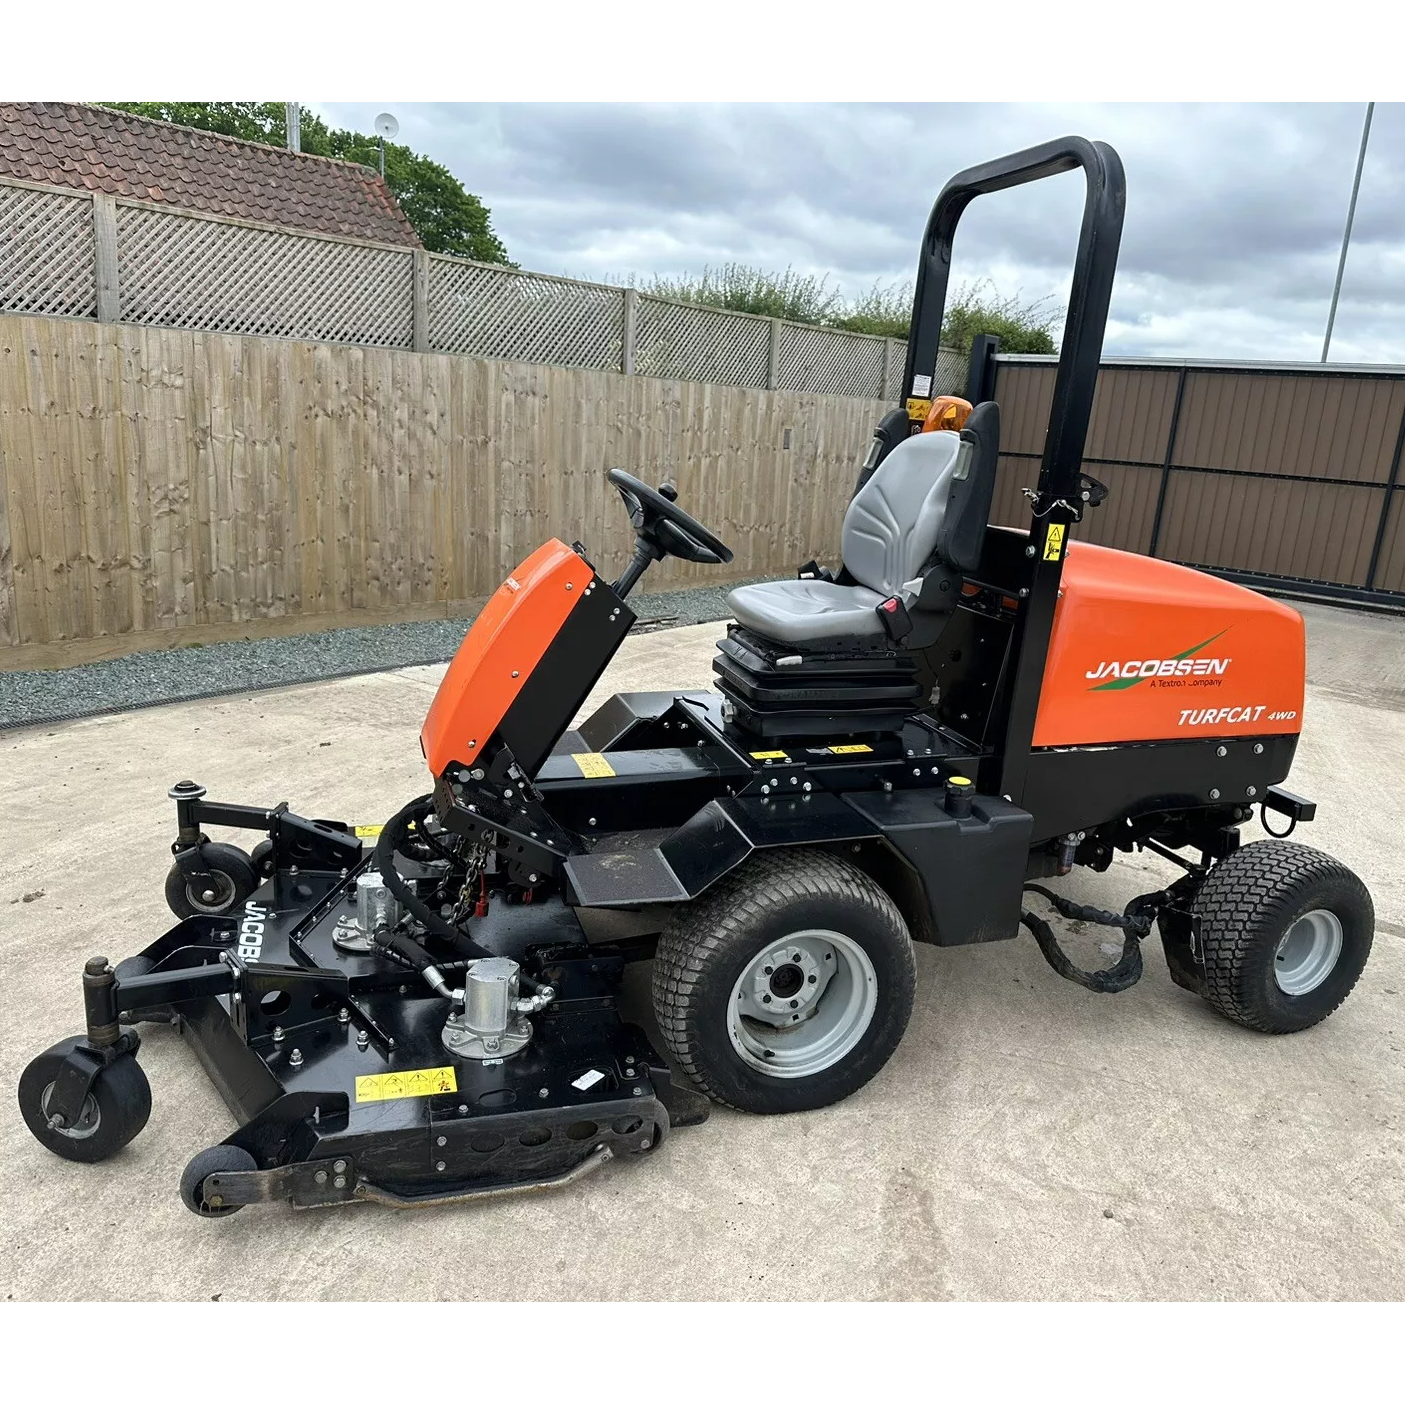 2016 JACOBSEN TURFCAT OUTFRONT DIESEL RIDE ON LAWN MOWER